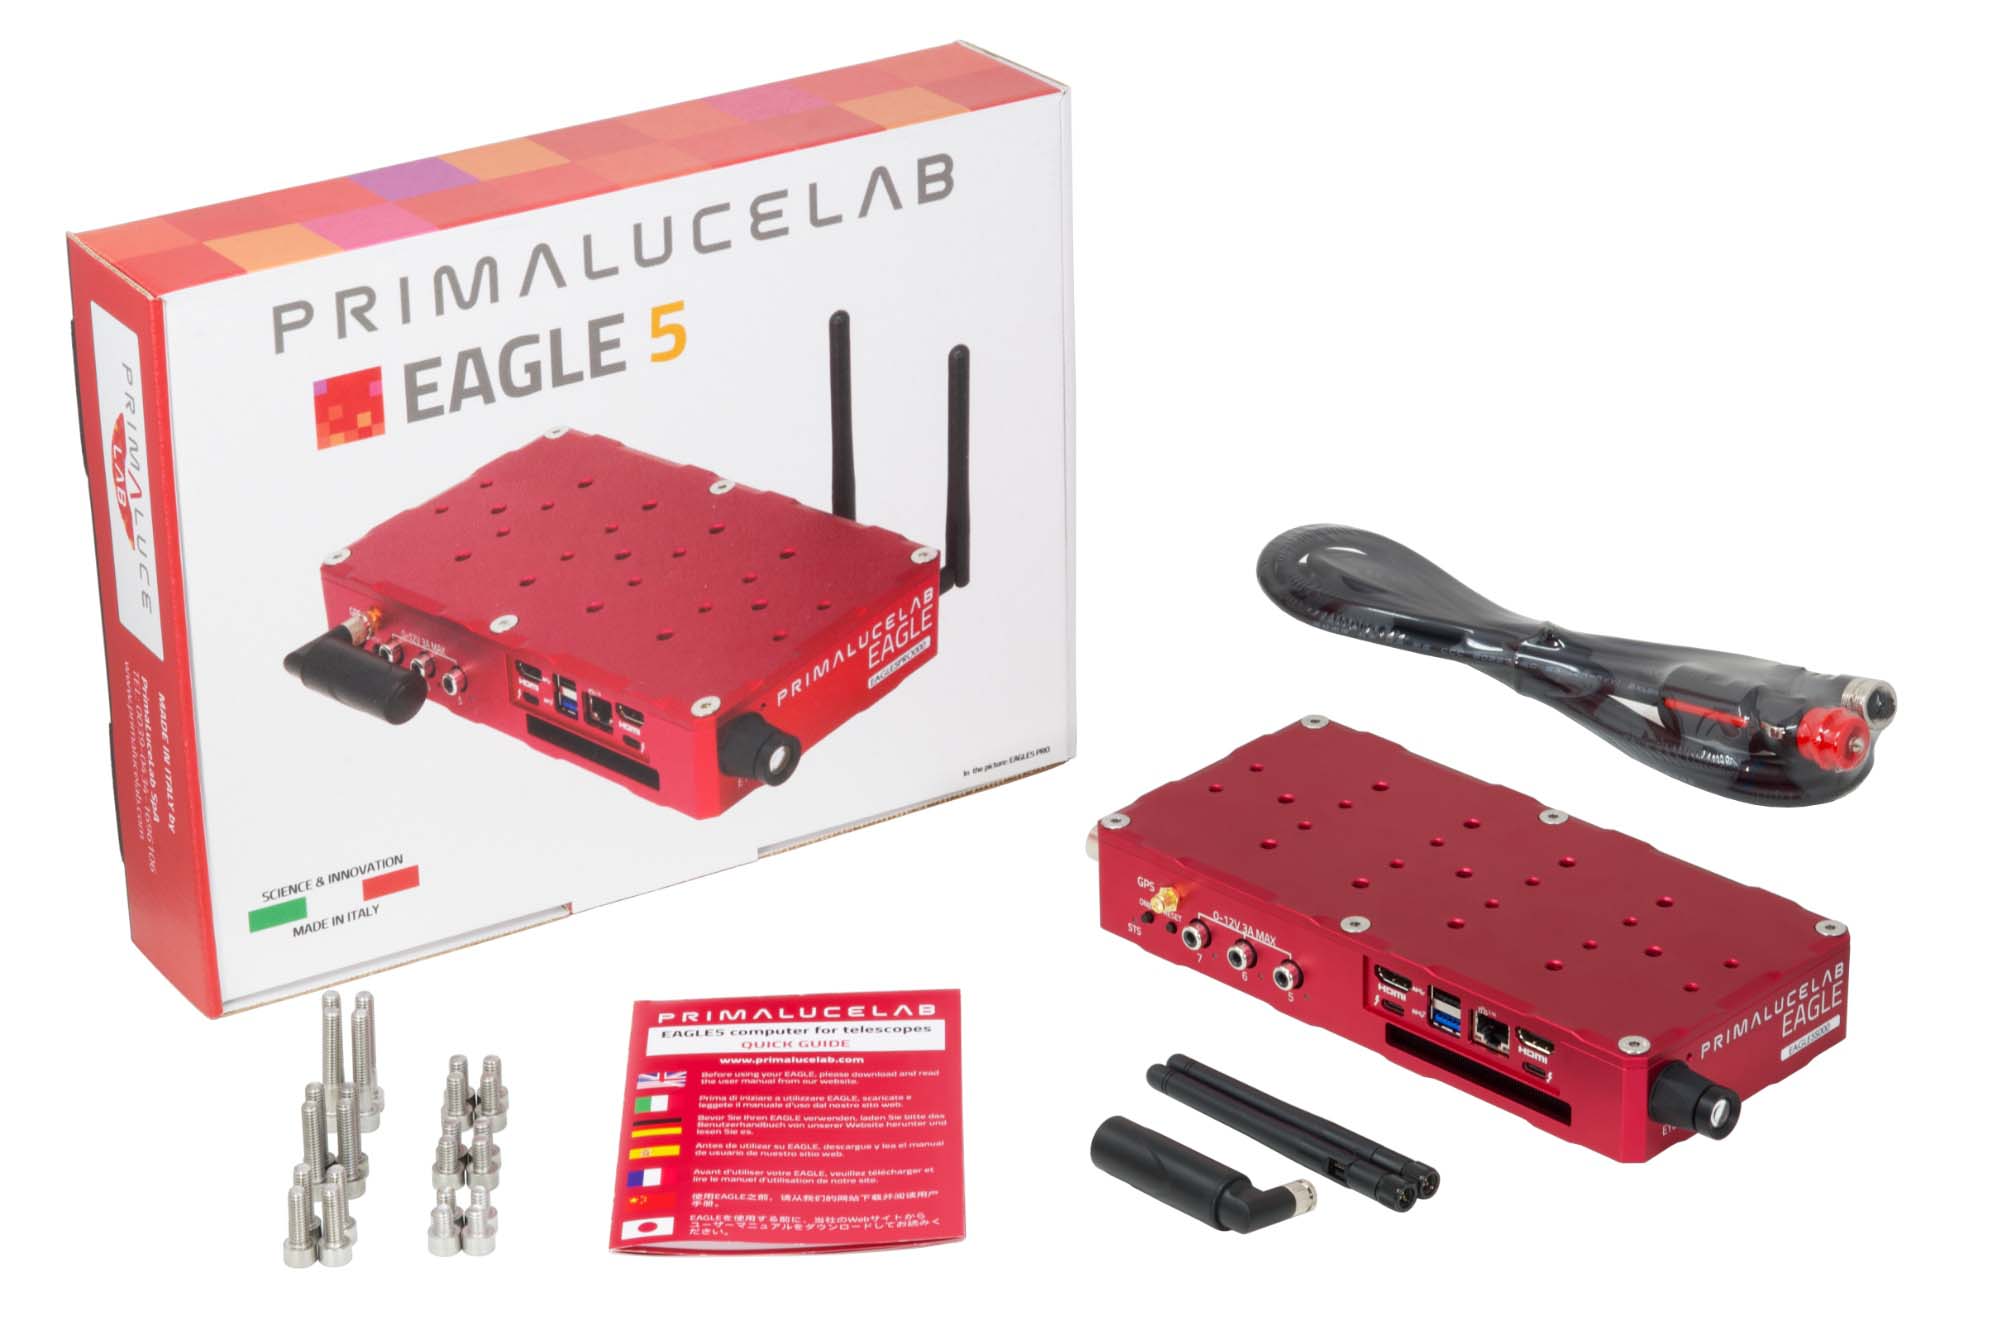 Primaluce Lab EAGLE5 S Computer for Telescopes and Astrophotography in the Box